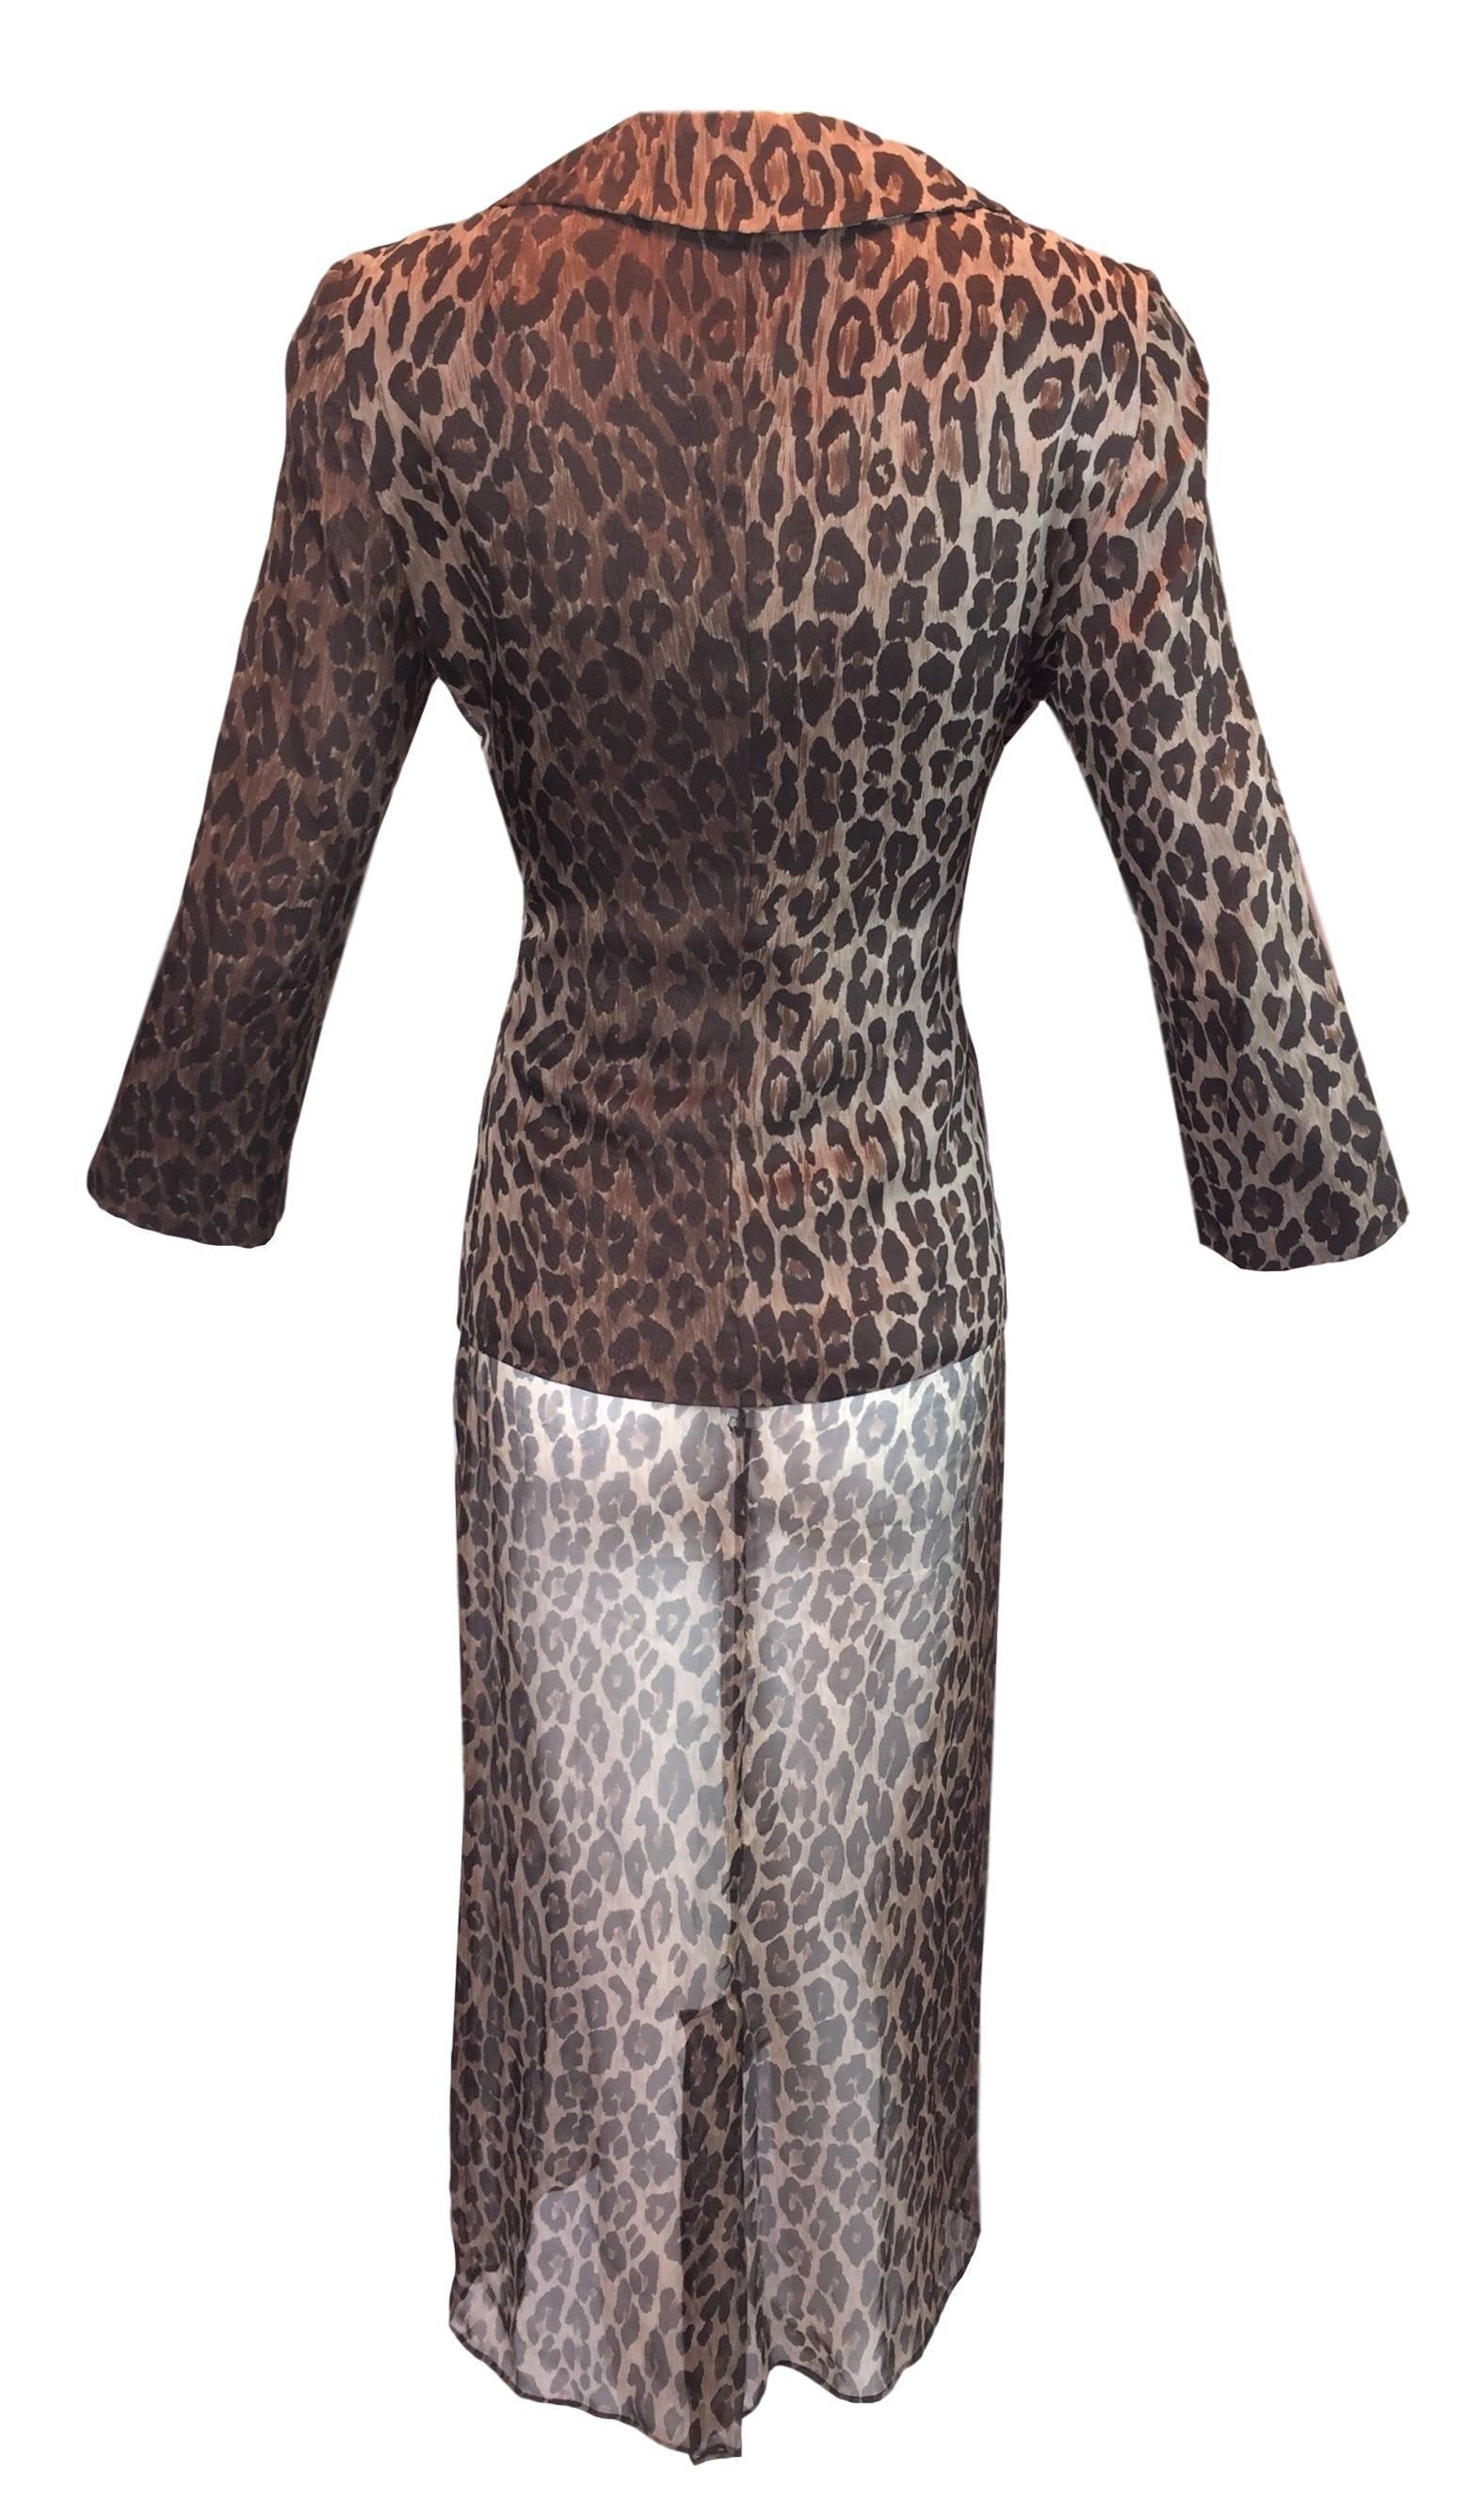 DESIGNER: S/S 1997 Dolce & Gabbana runway 3-pieces suit. The leopard jacket and skirt were shown on the runway, this listing also comes with a matching brown sheer silk skirt that can be worn alone or layered with the leopard skirt. 

Please contact